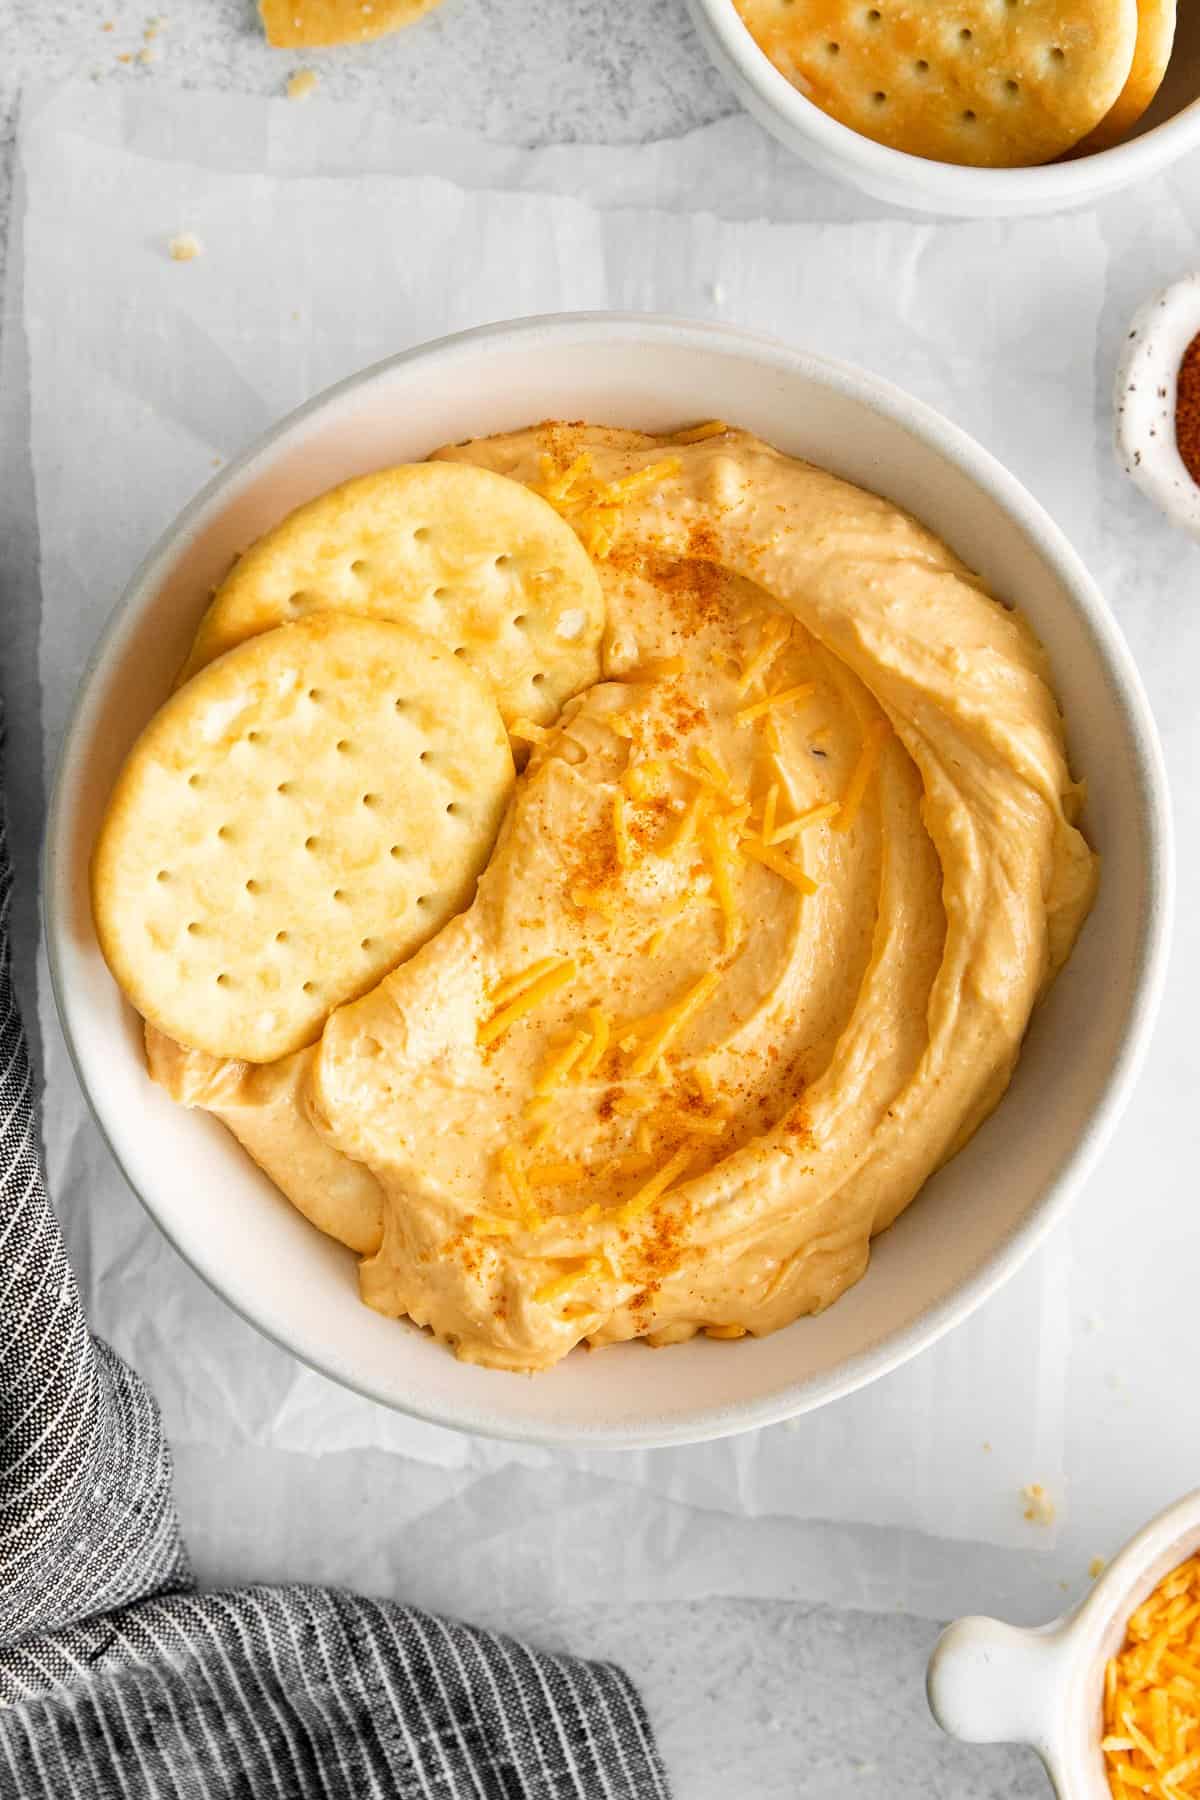 Homemade cheese spread in a bowl with crackers.